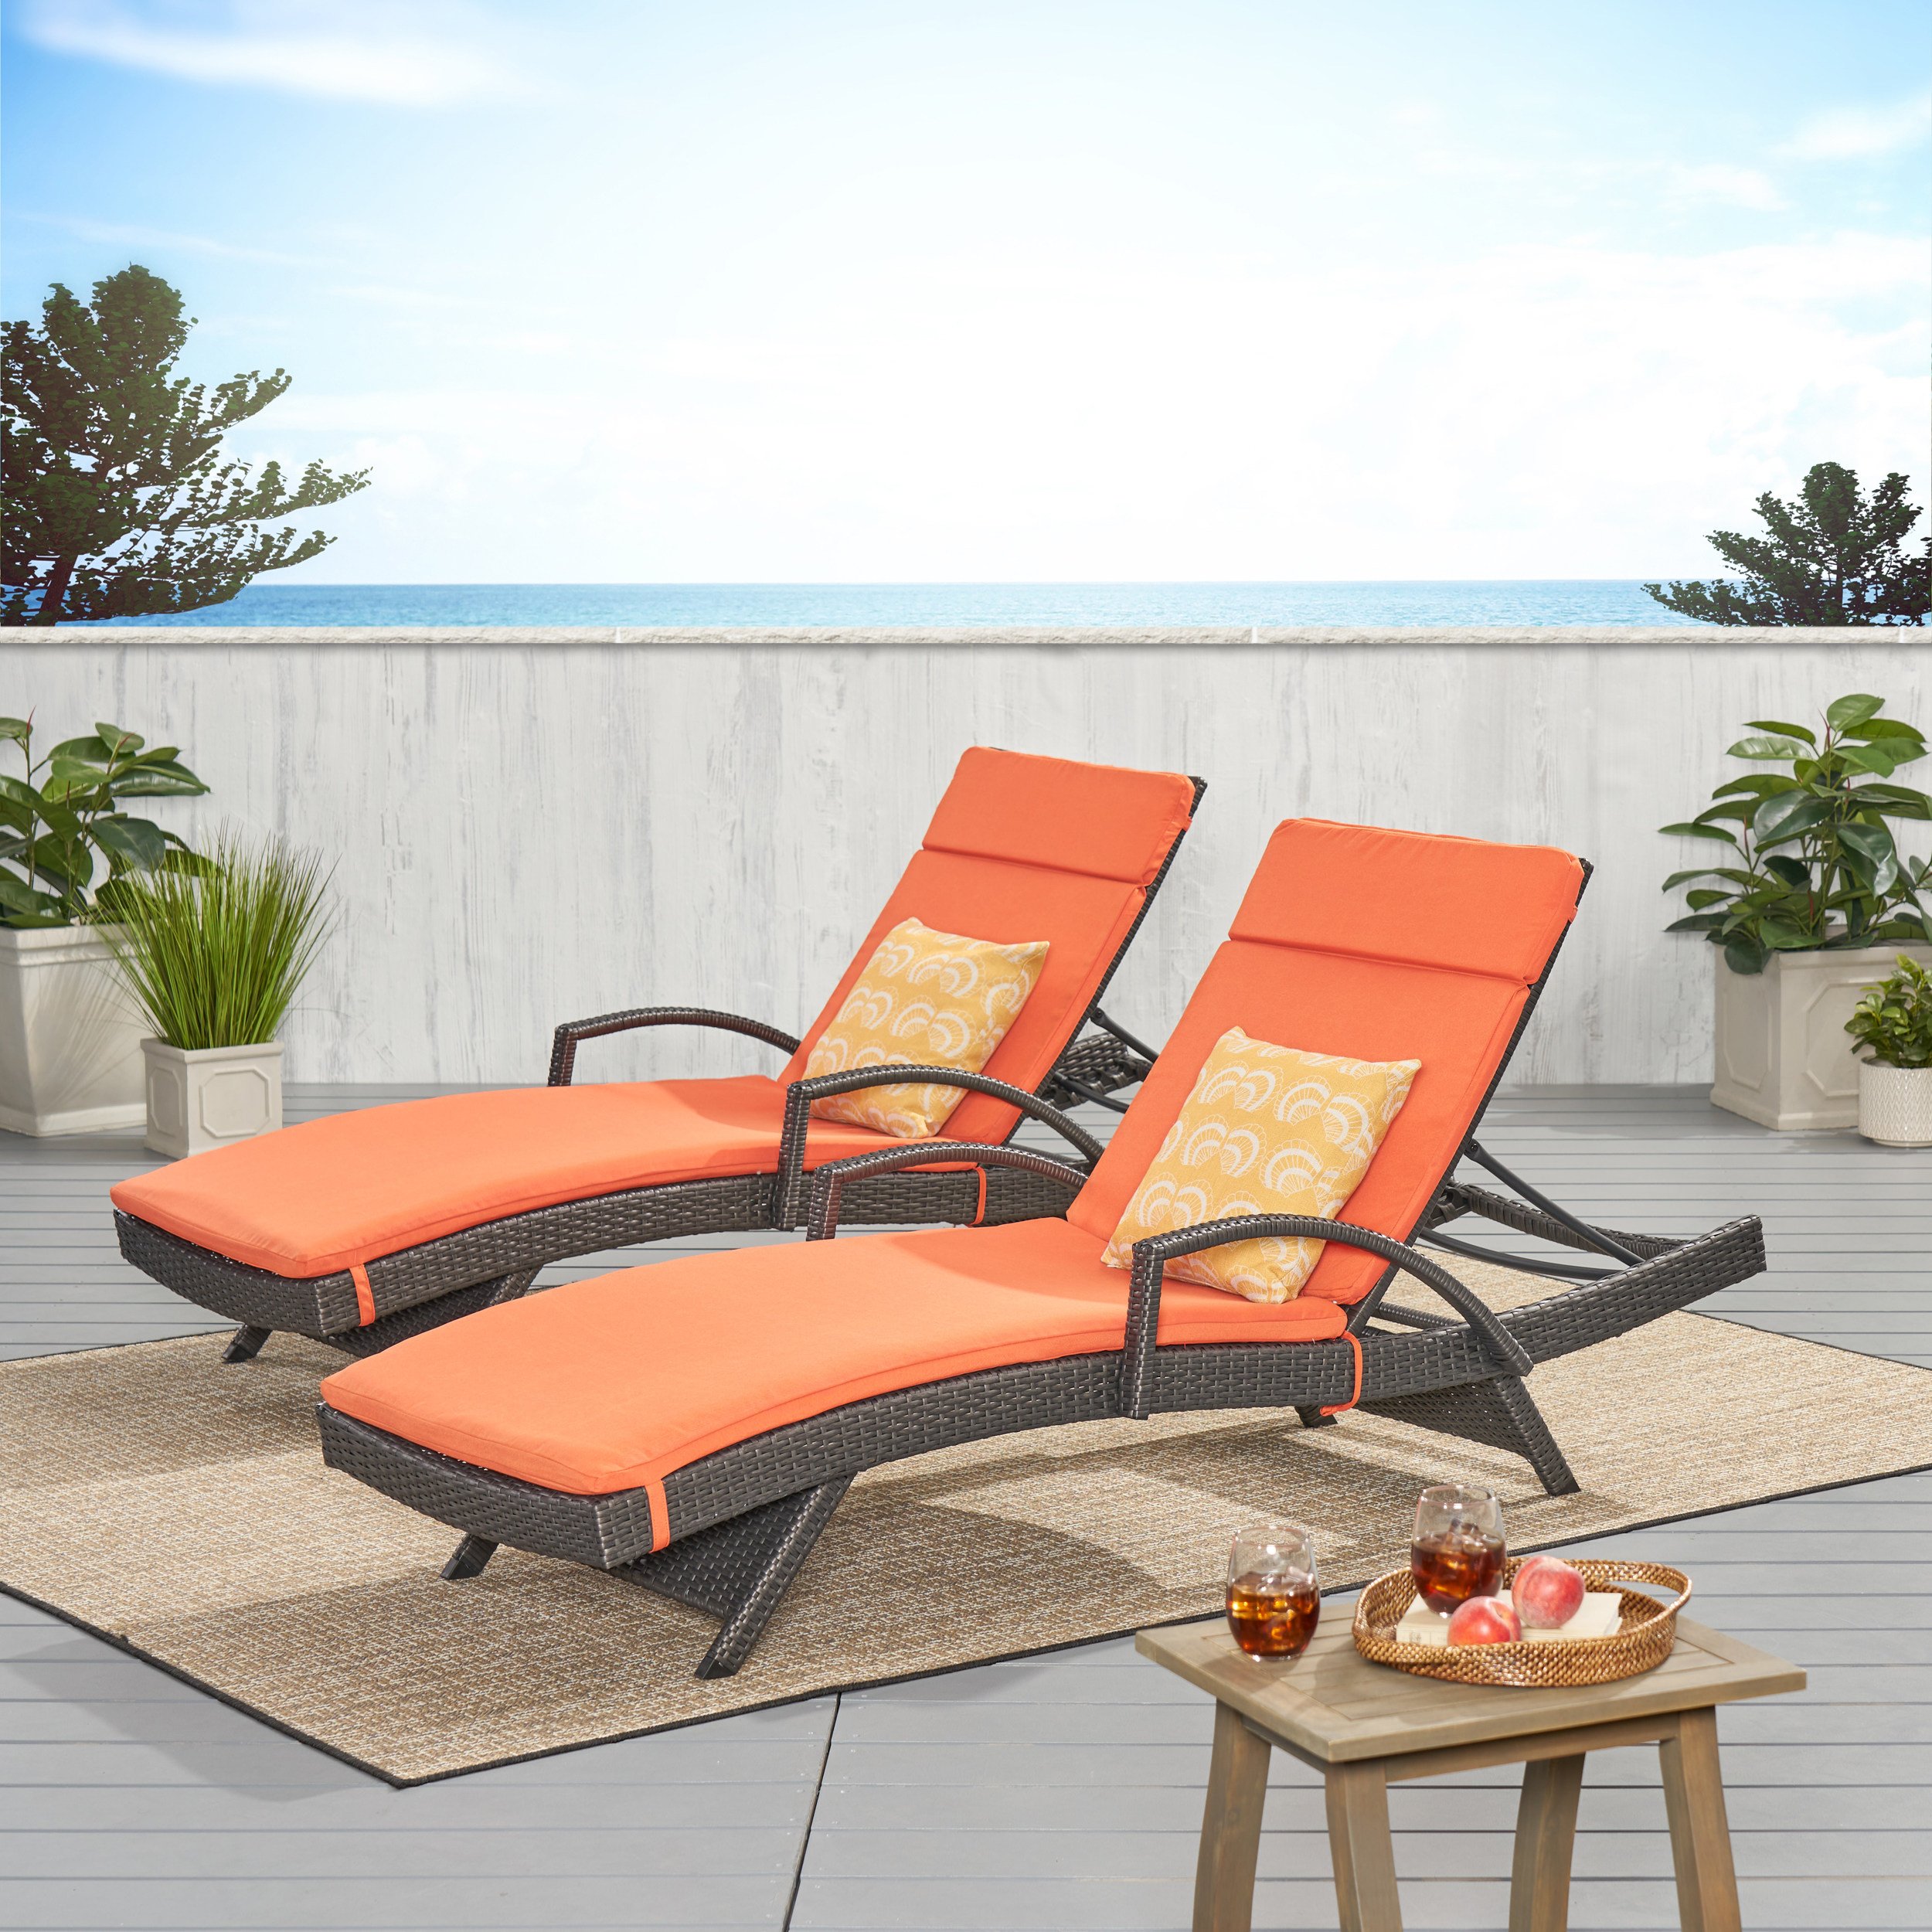 Soleil Outdoor Wicker Chaise Lounges With Water Resistant Cushions (Set Of 2) - Navy Blue